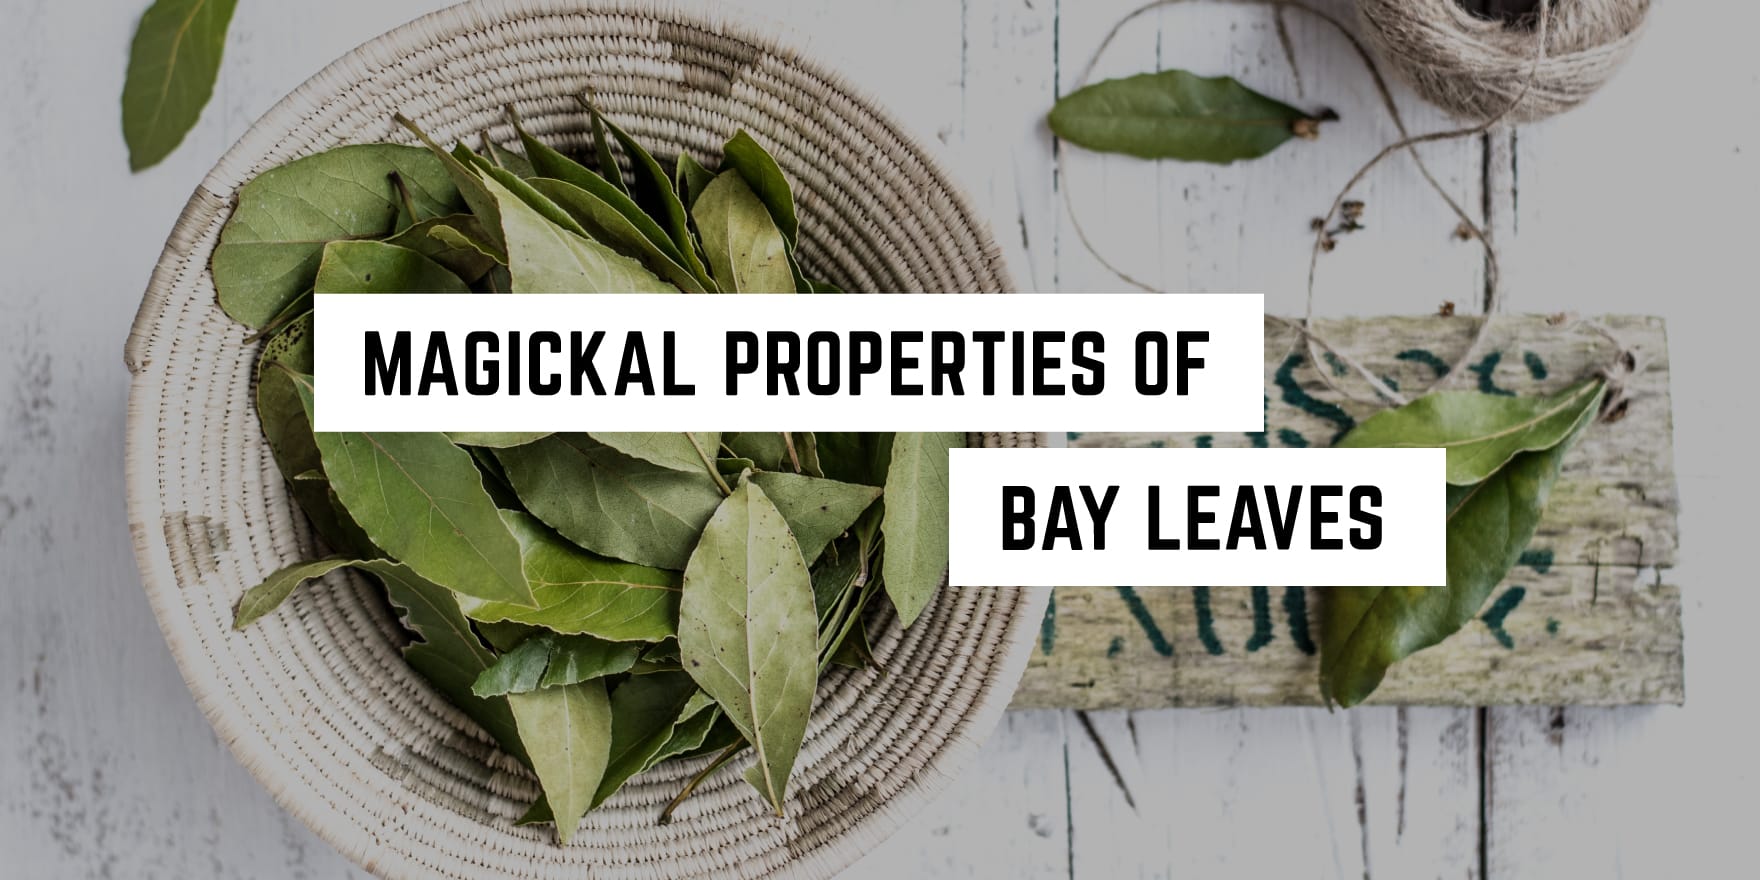 Exploring the enchanting and spiritual uses of bay leaves in folklore and natural healing.